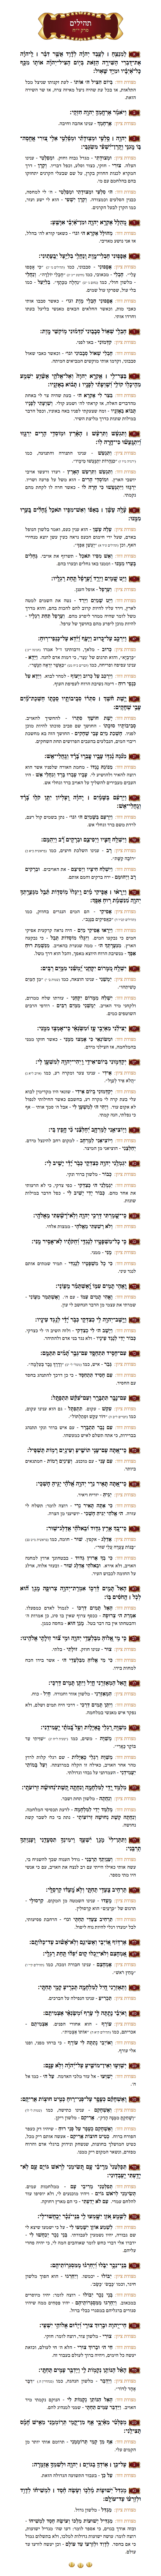 Sefer Tehillim Chapter 18 with commentary